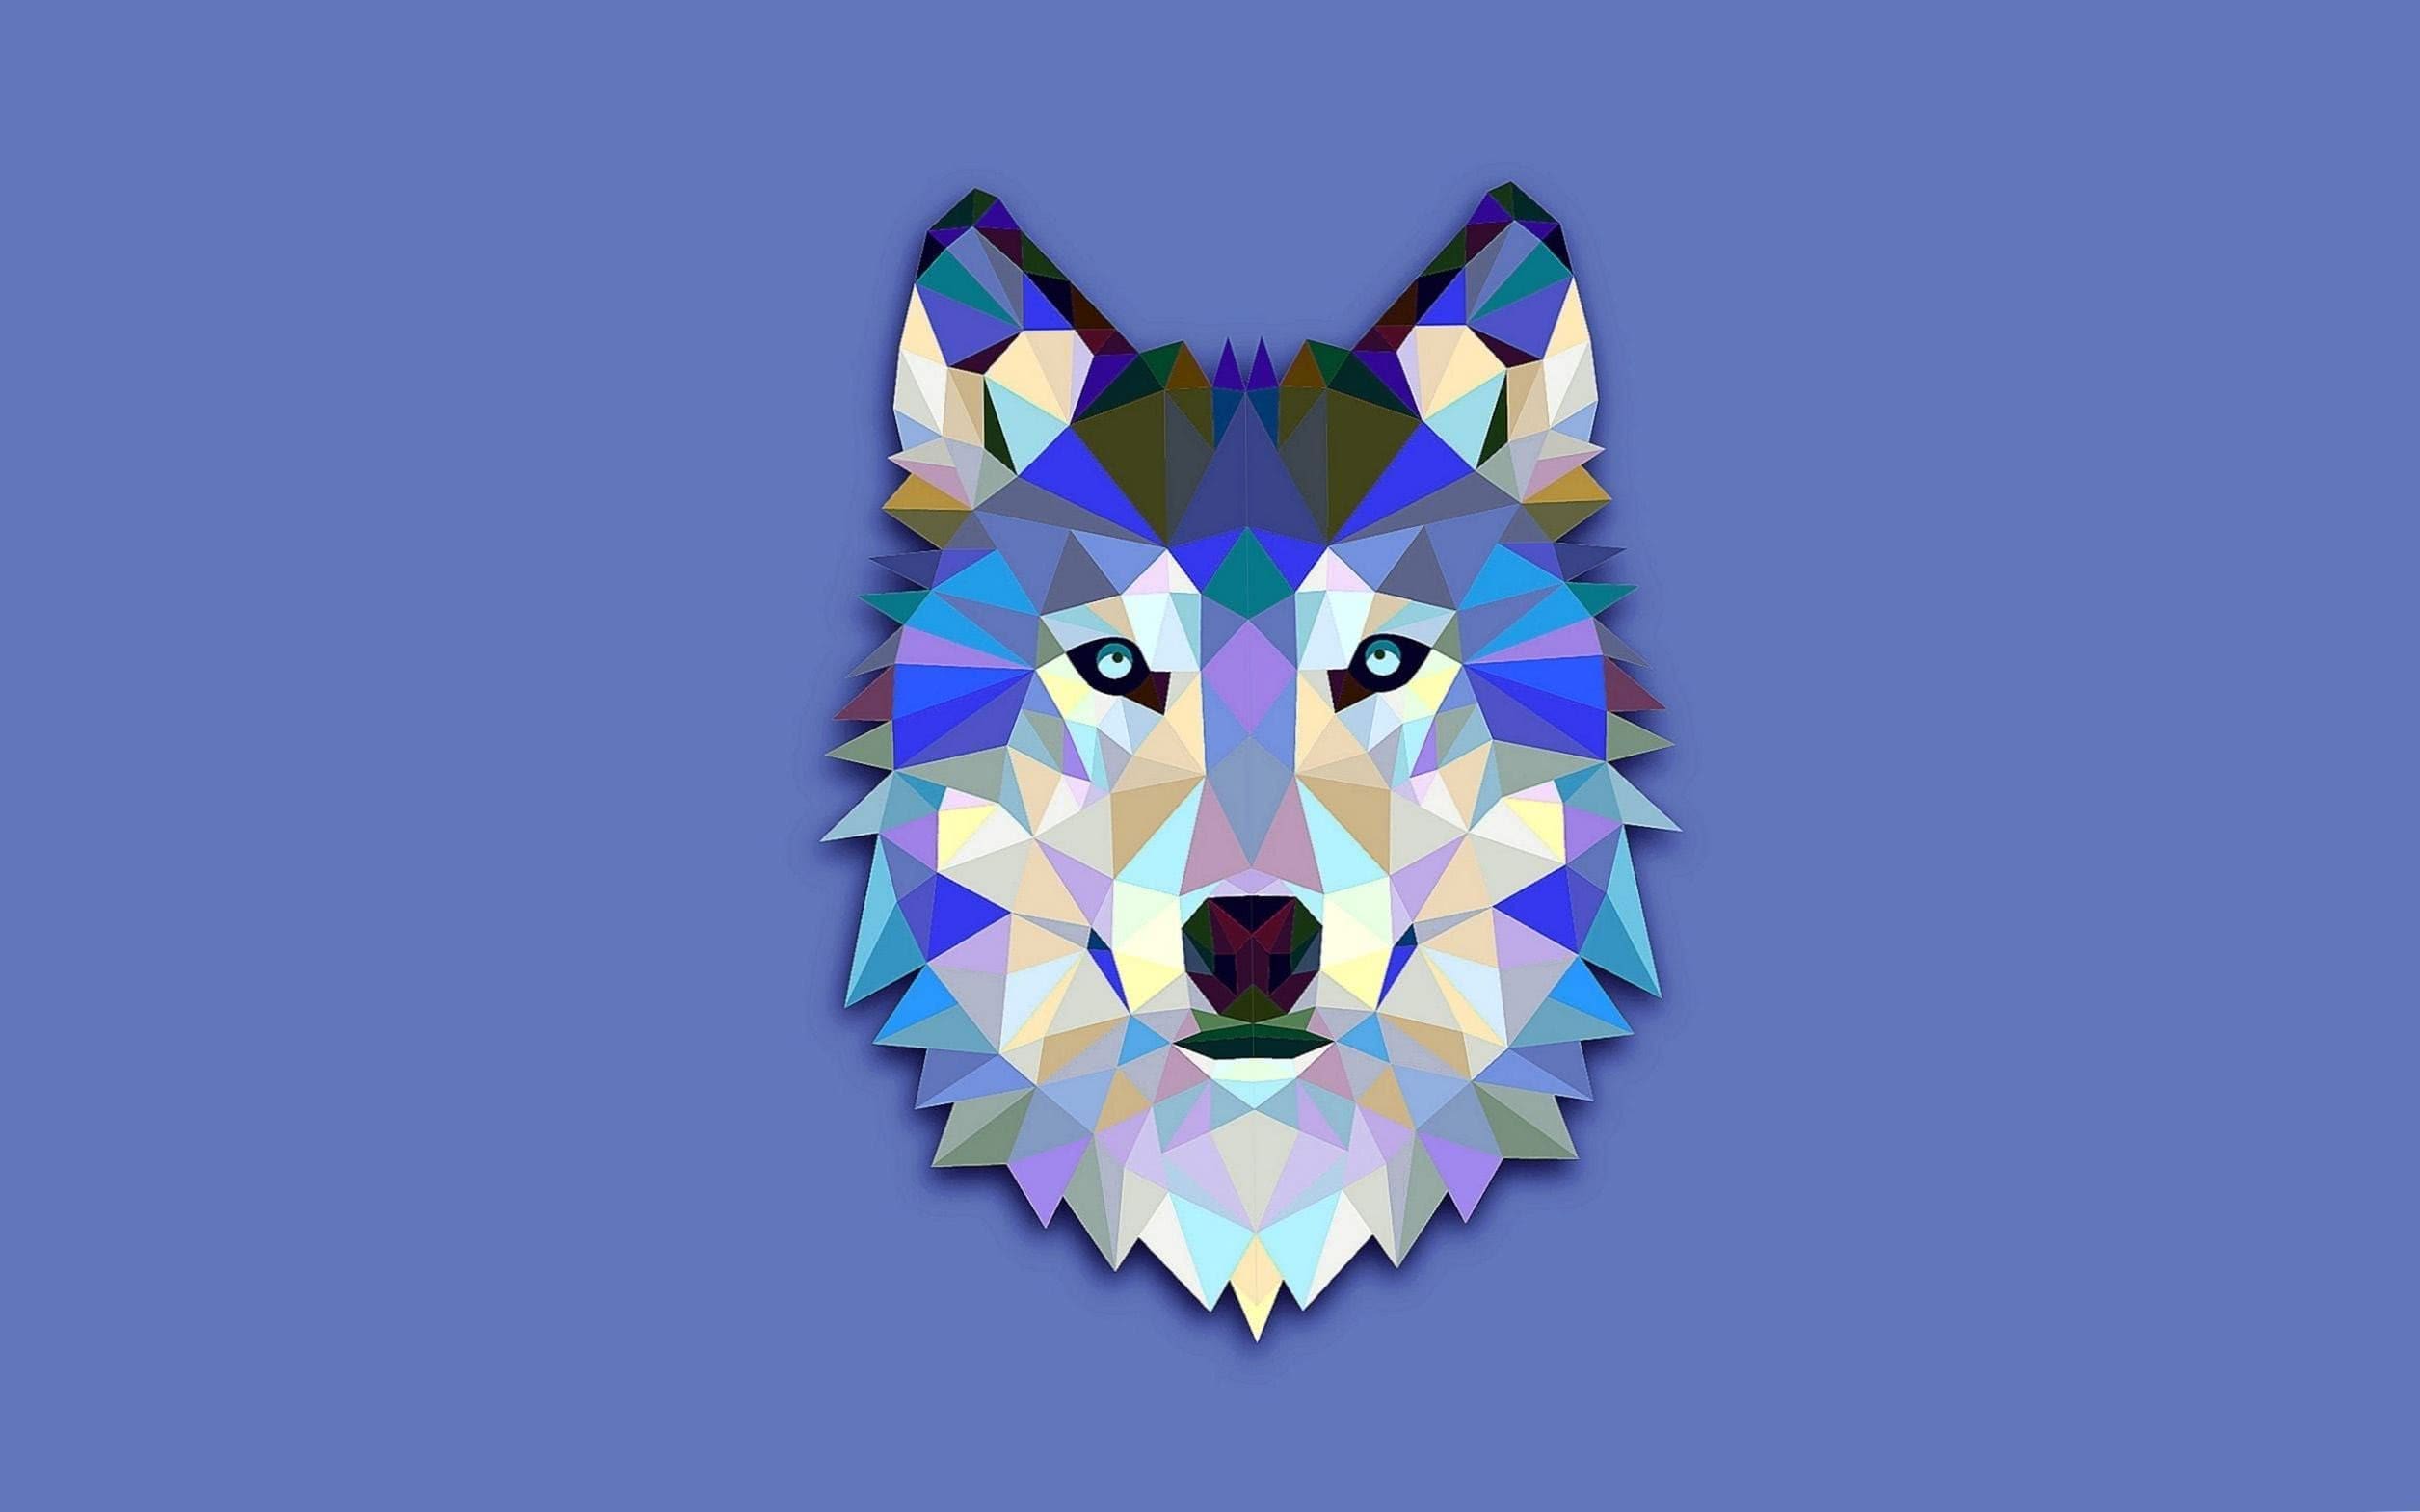 Abstract Wolves HD Wallpapers